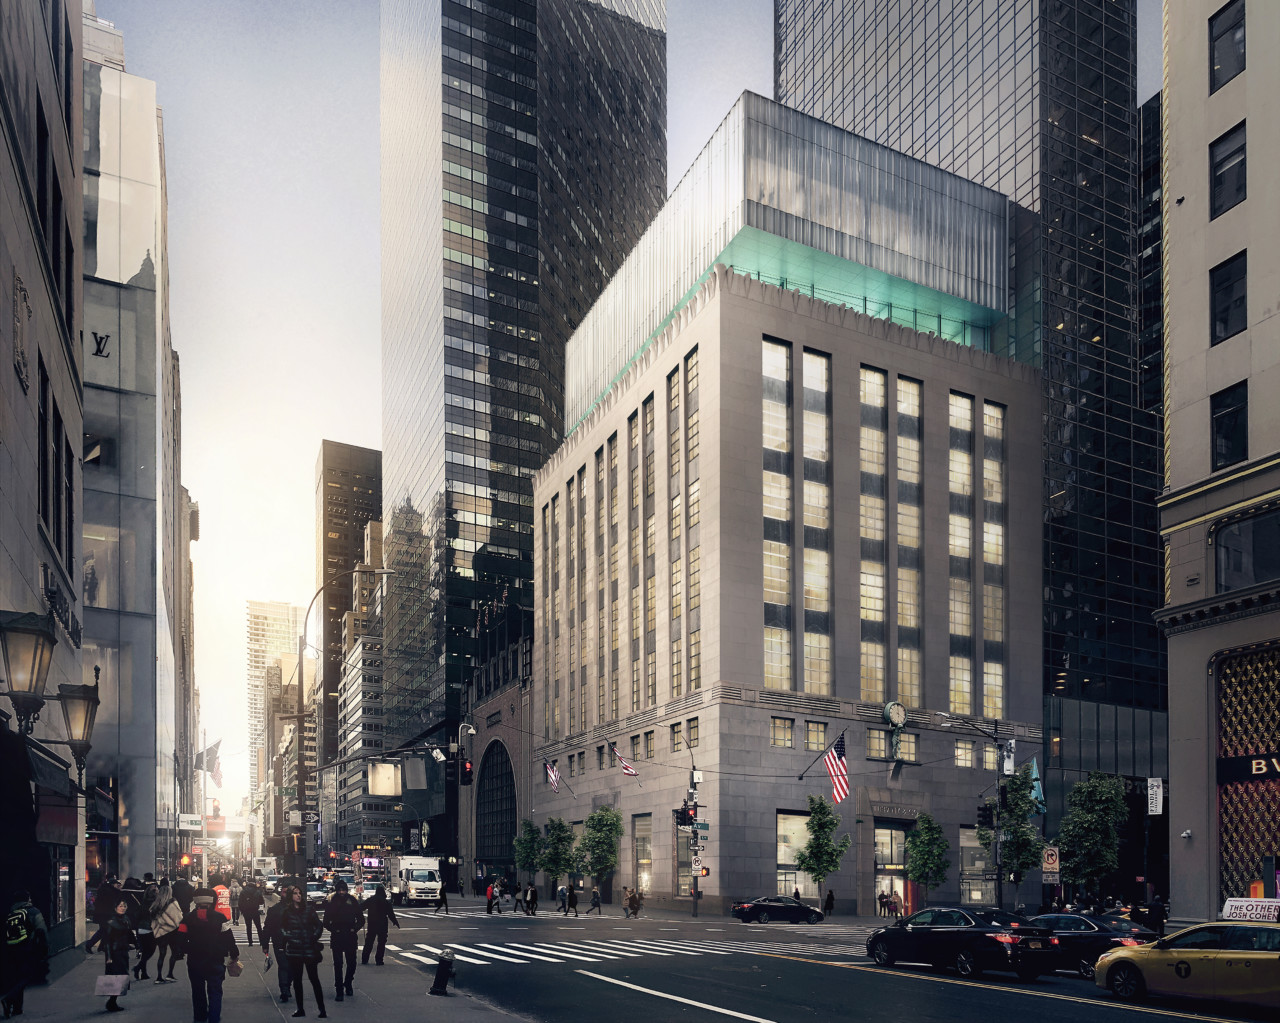 Street view rendering of a textured glass volume above a limestone-clad building in New York